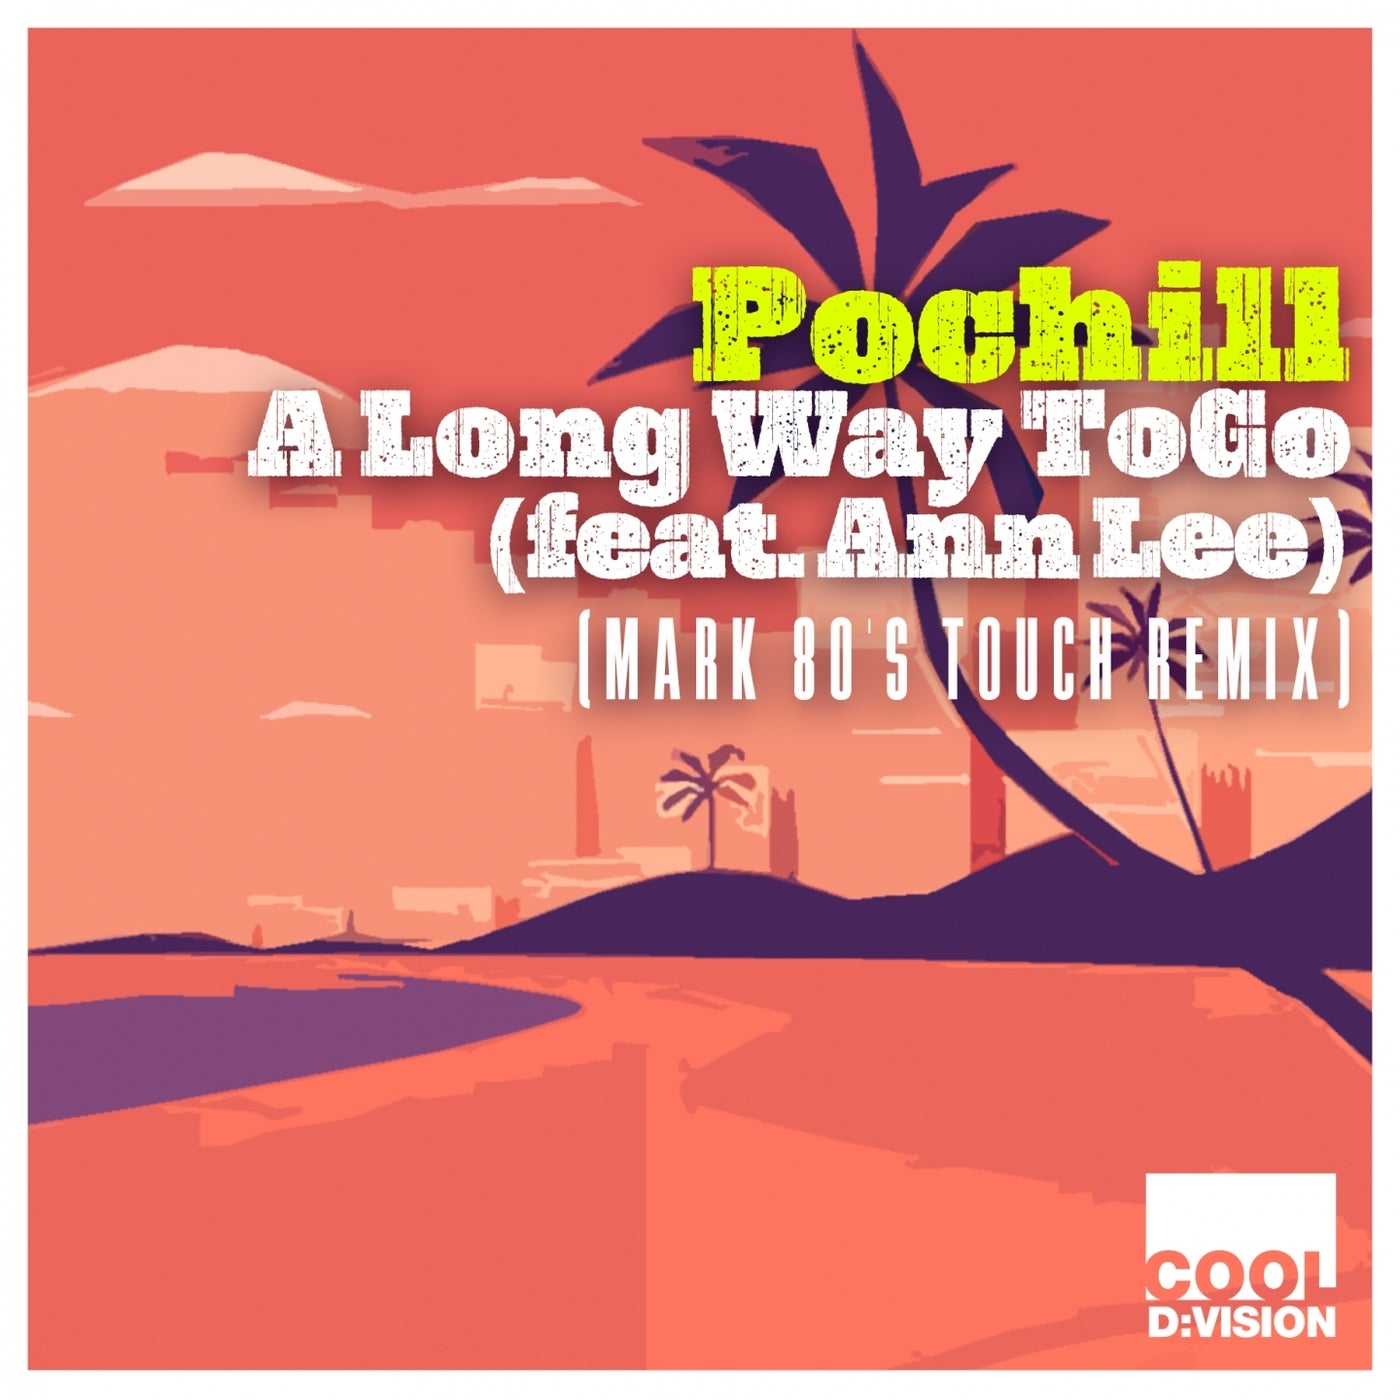 A Long Way to Go (feat. Ann Lee) (feat. Ann Lee) [Mark 80's Touch Remix]